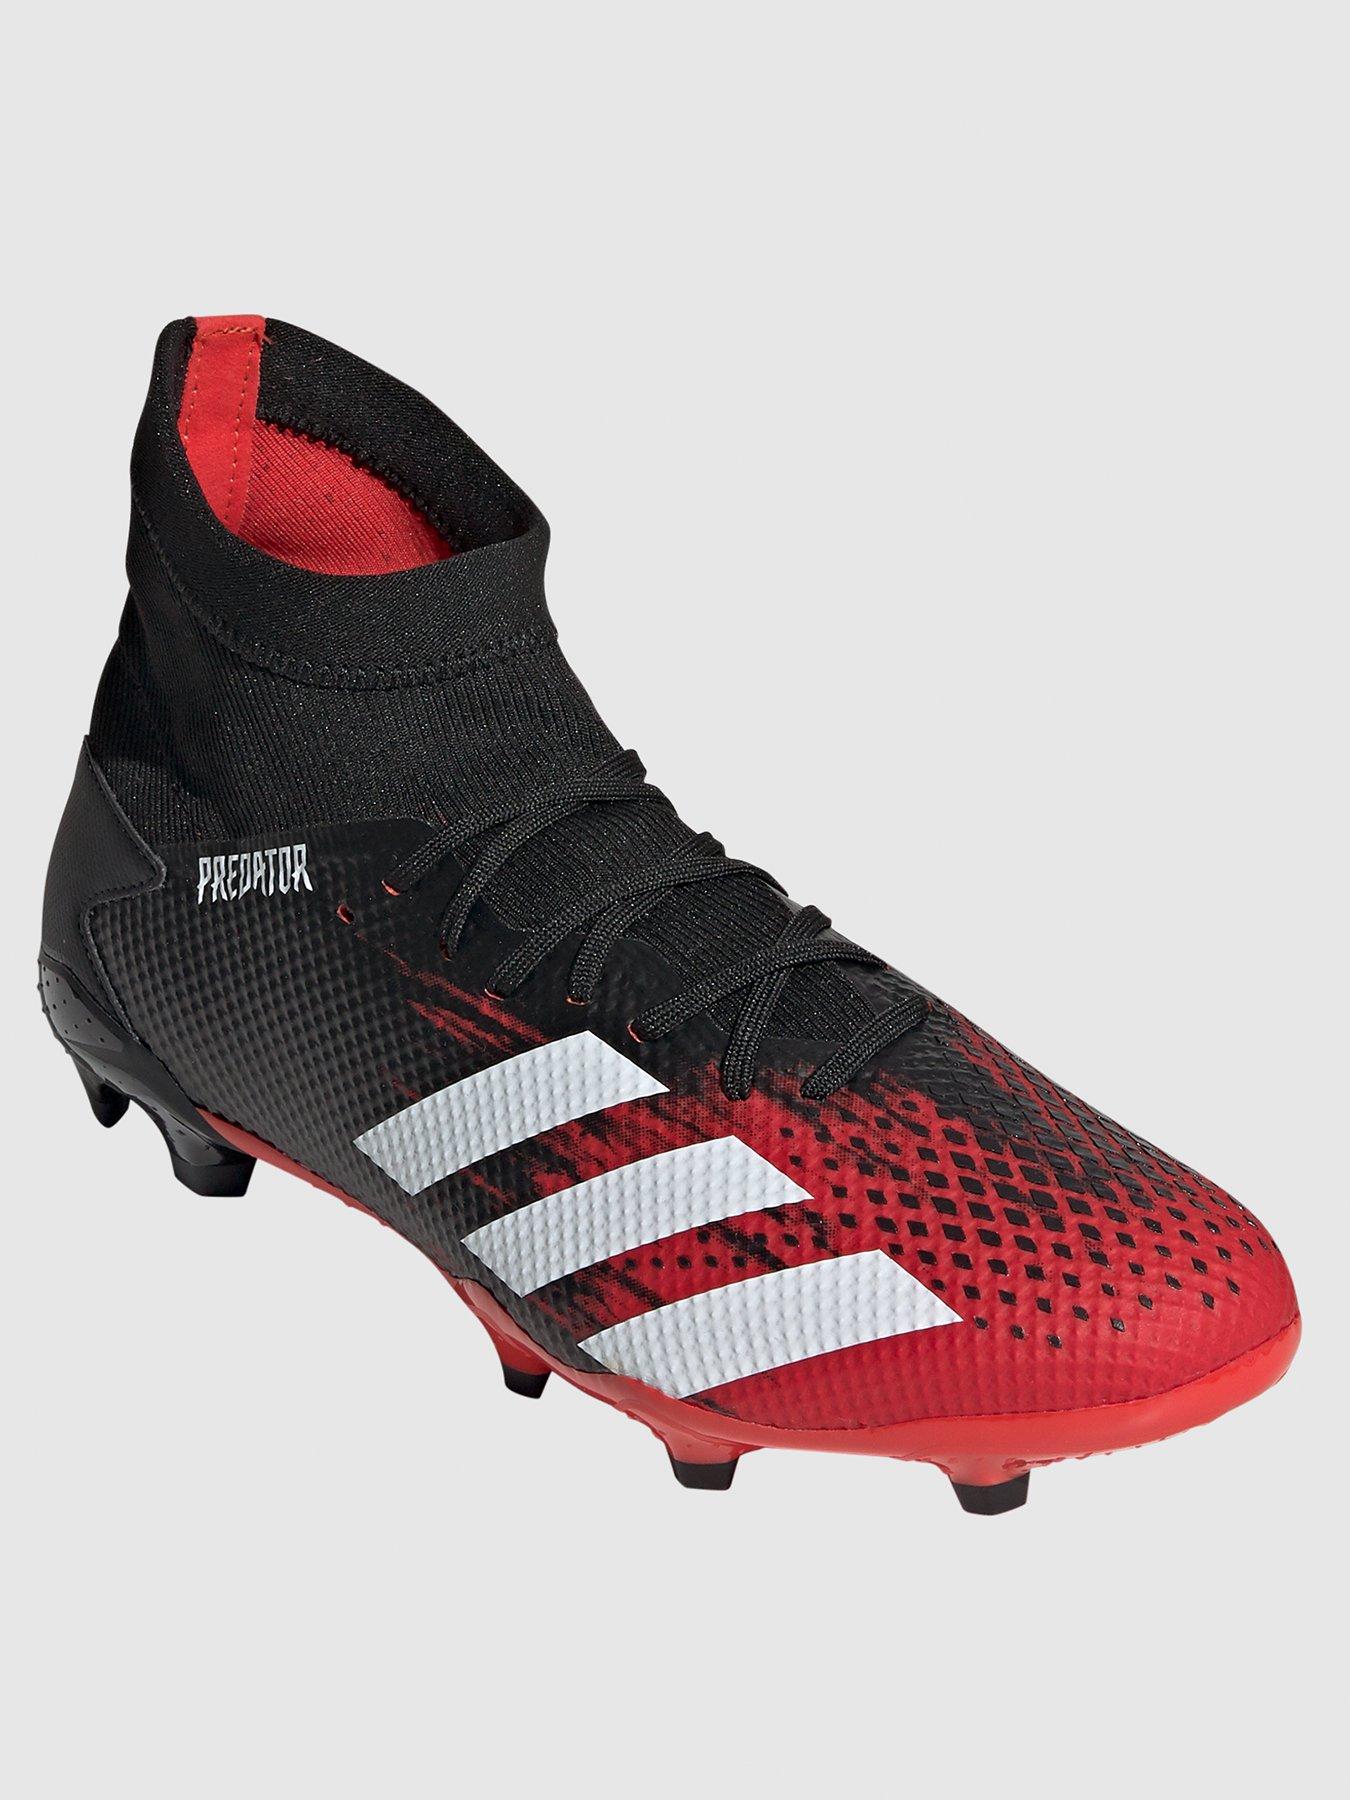 adidas boots red and black